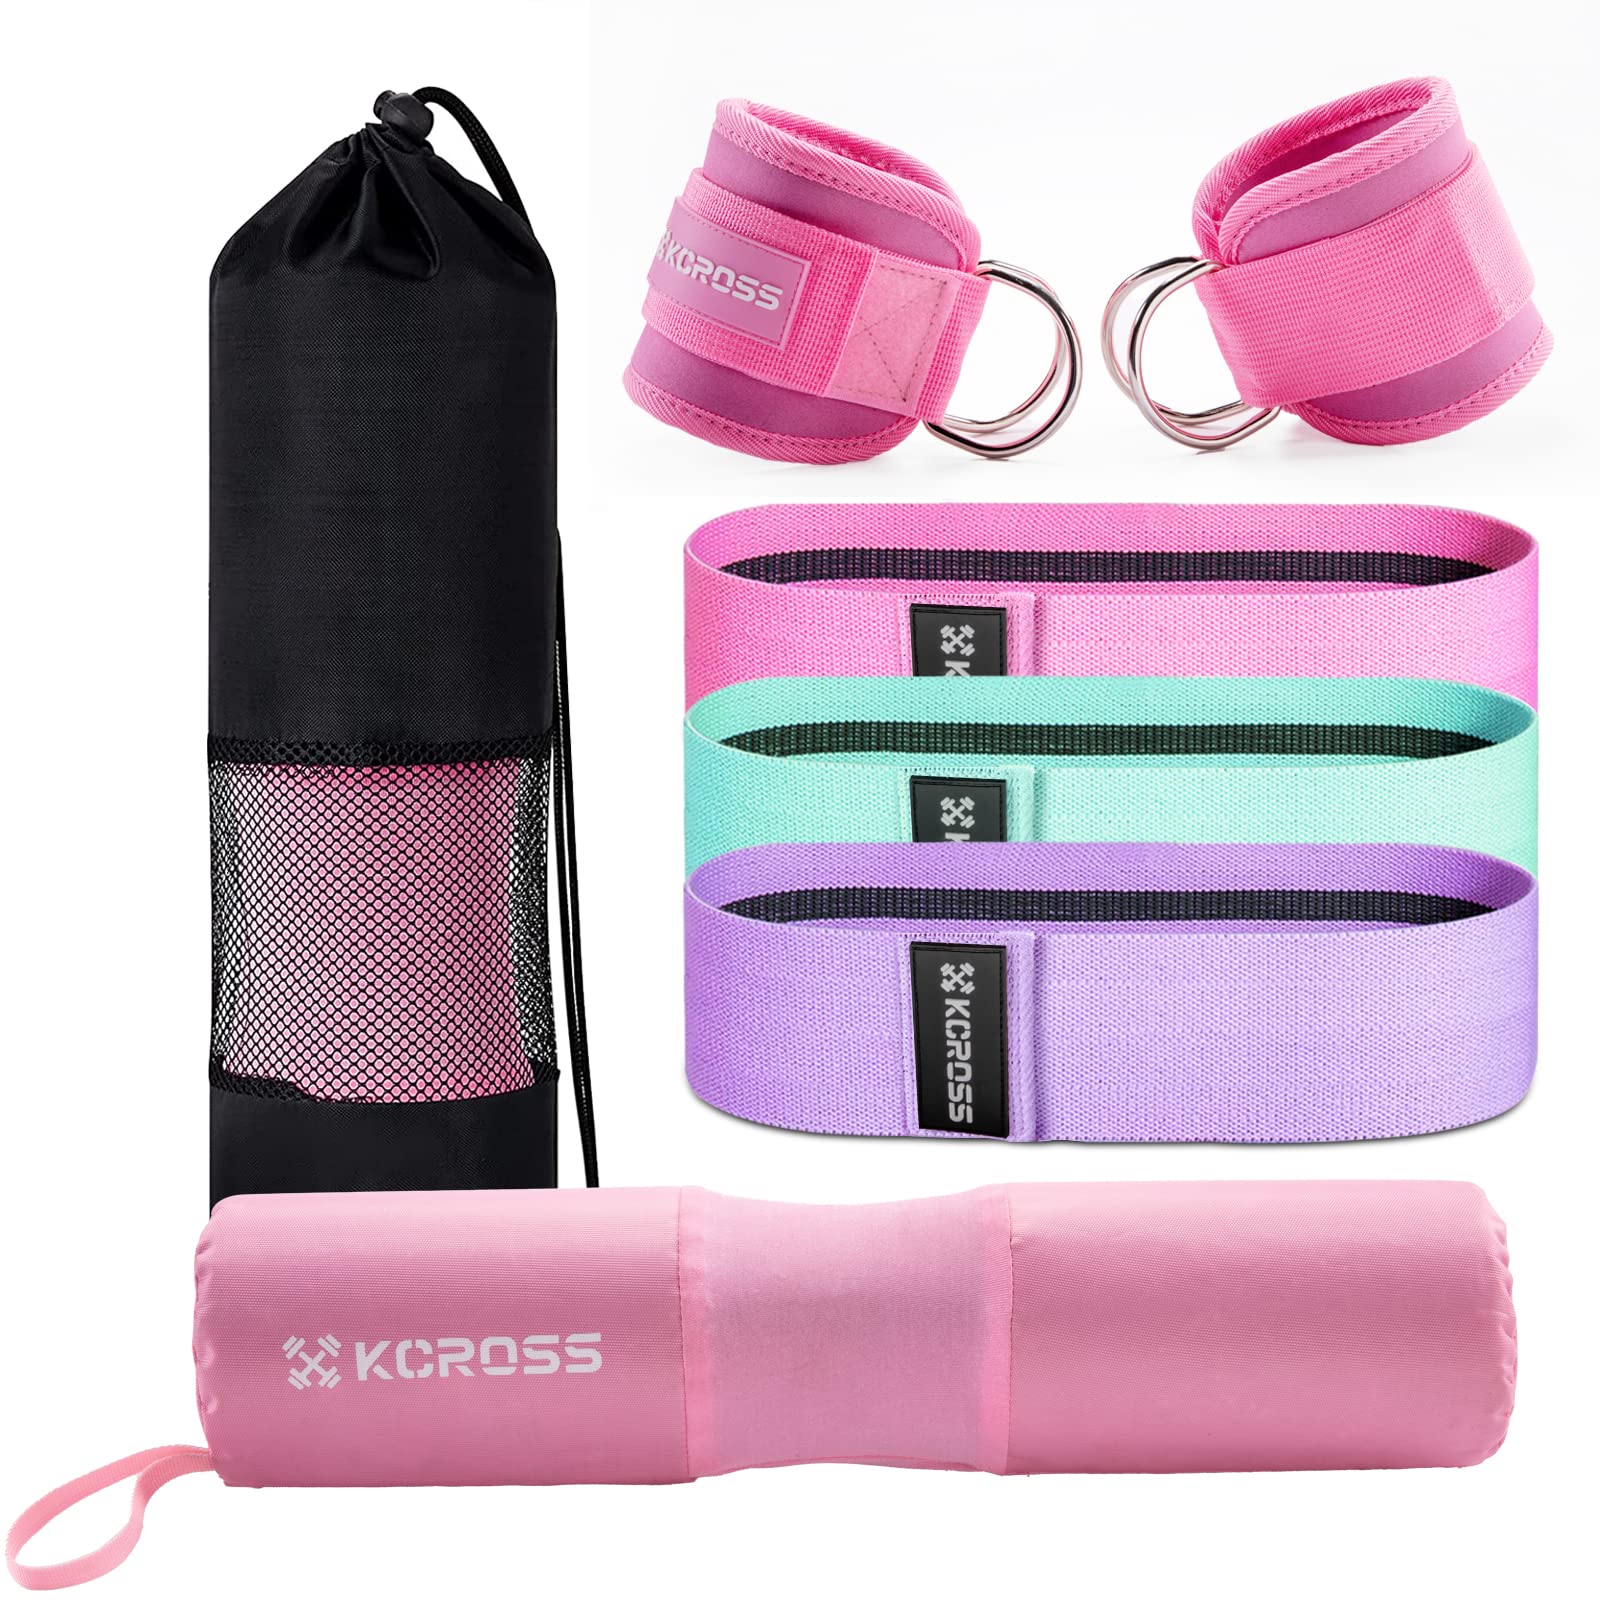 Lumia Fitness 7 Piece Glute Workout Kit, Barbell Squat Pad, 3 Fabric  Resistance Bands, 2 Ankle Straps, Carry Bag - Gym Accessories for Men and  Women